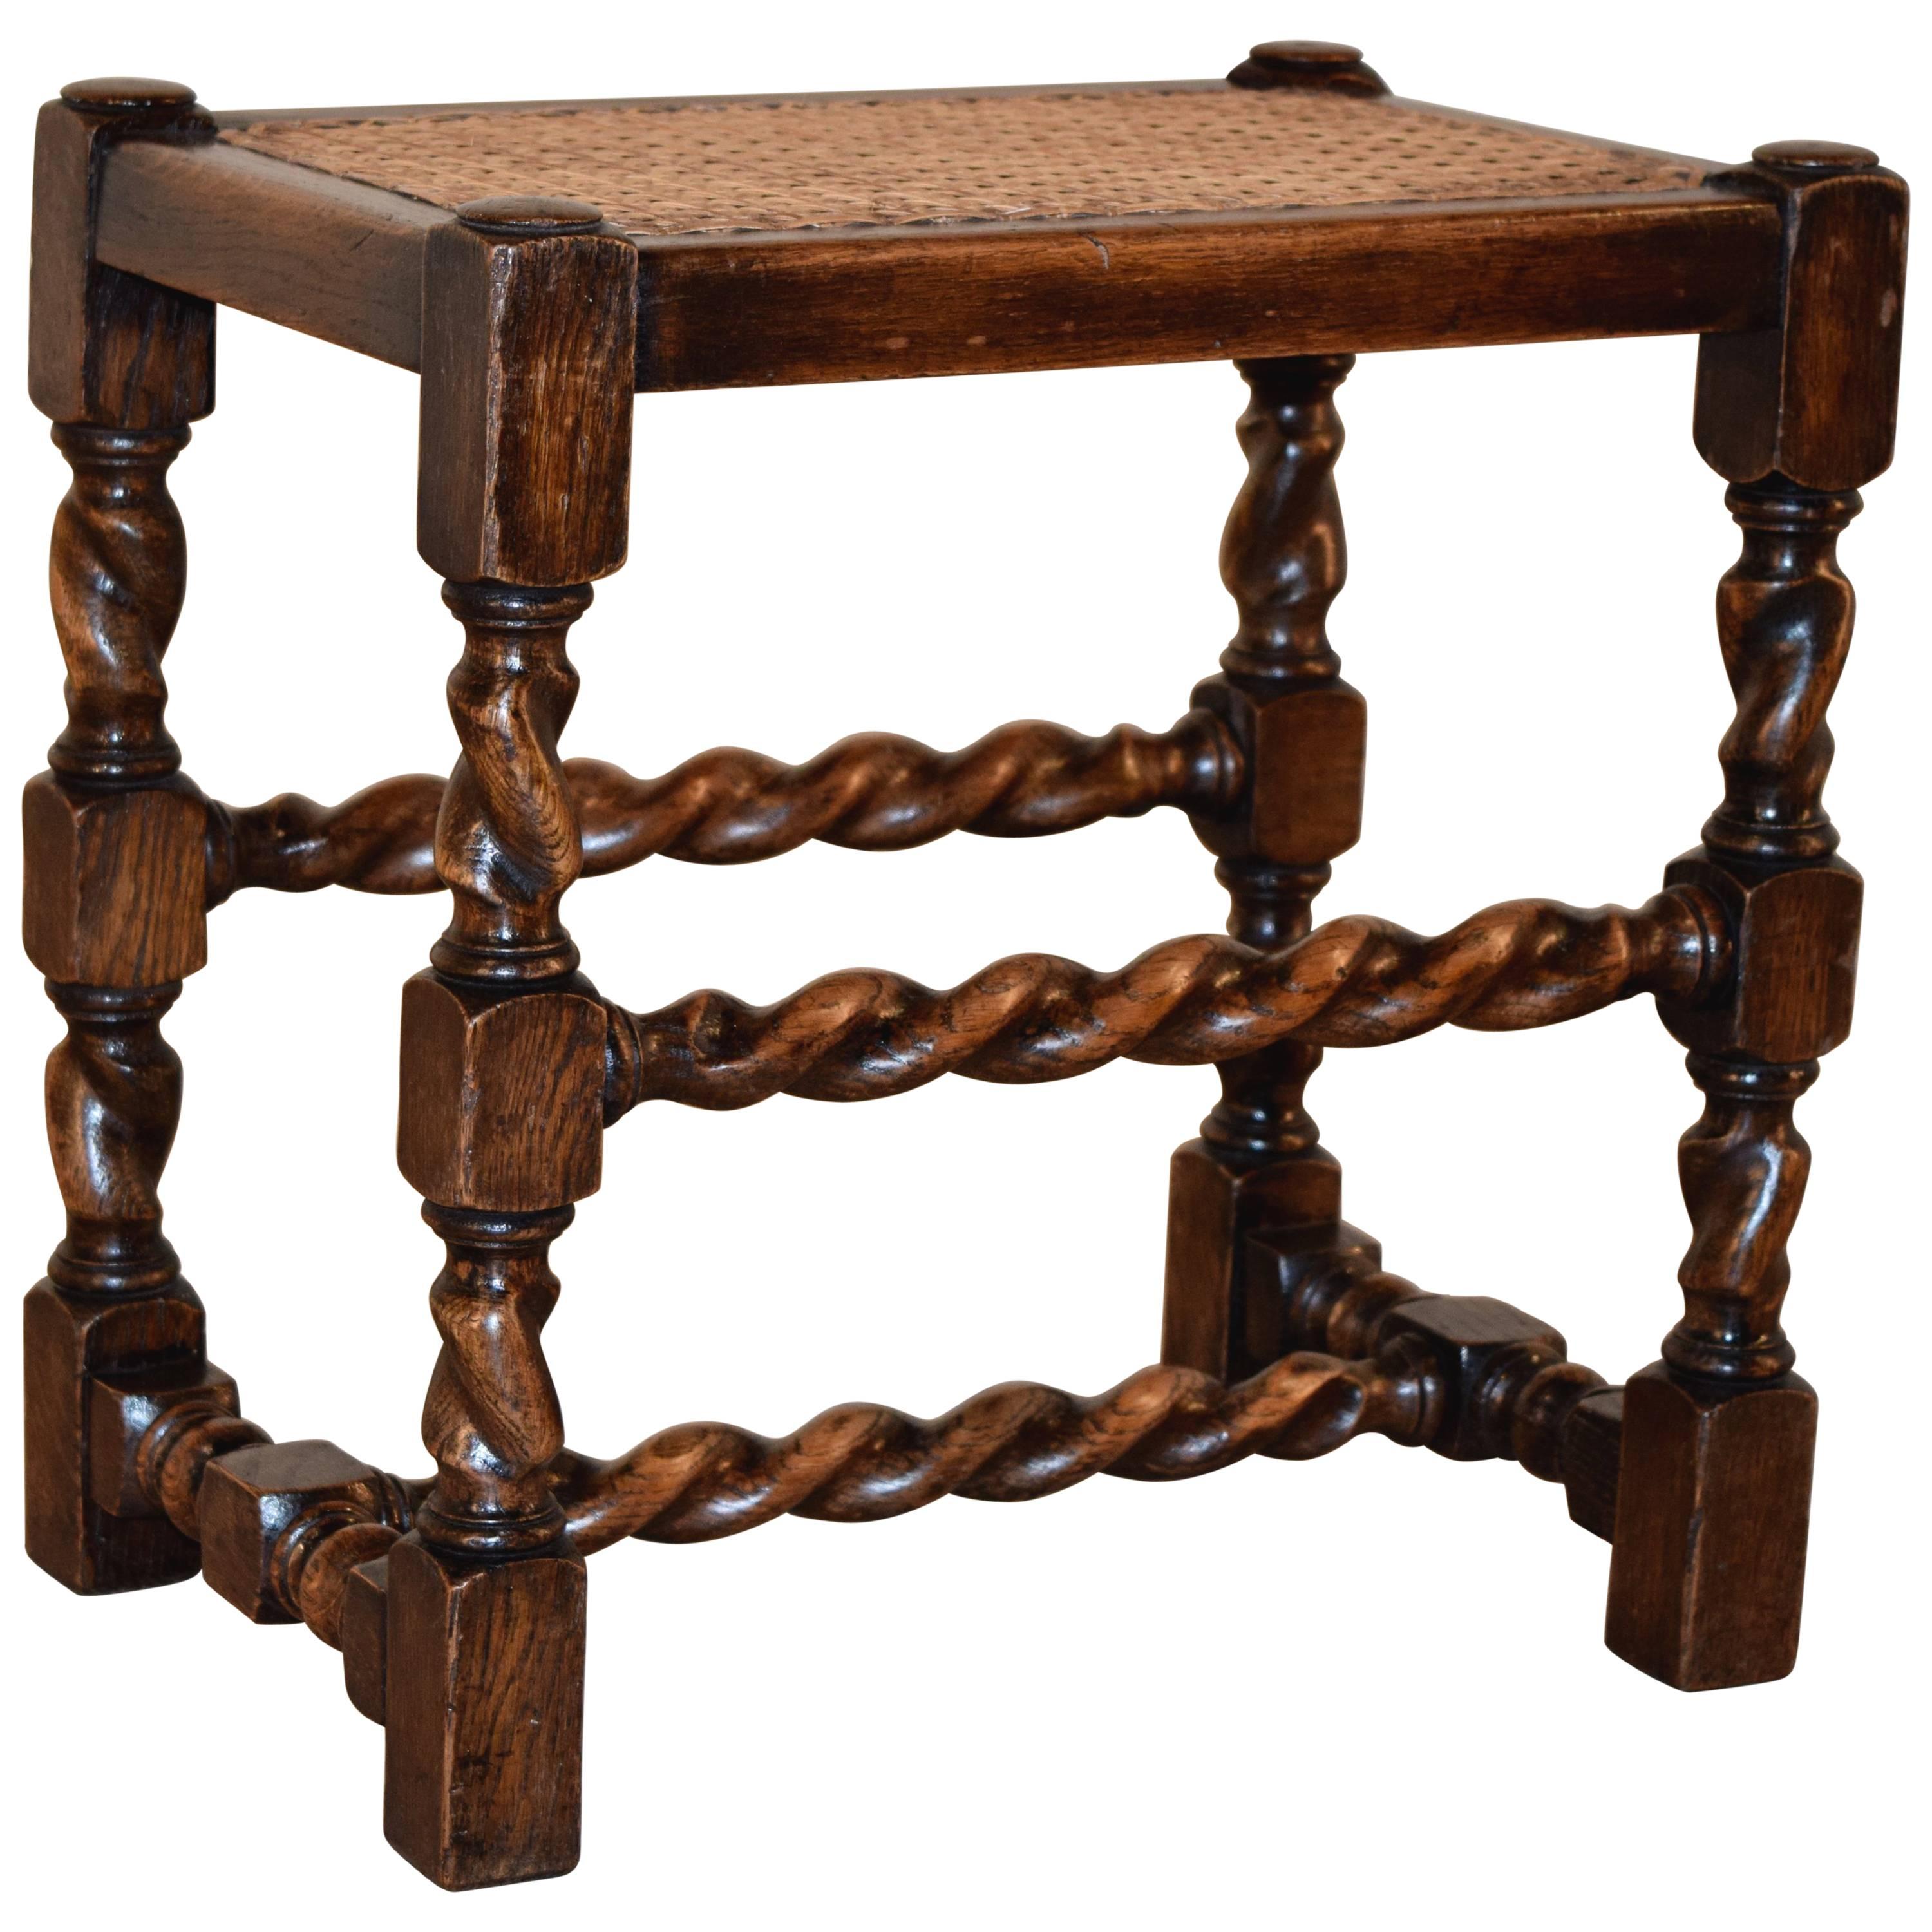 19th Century English Turned Stool with Caned Top